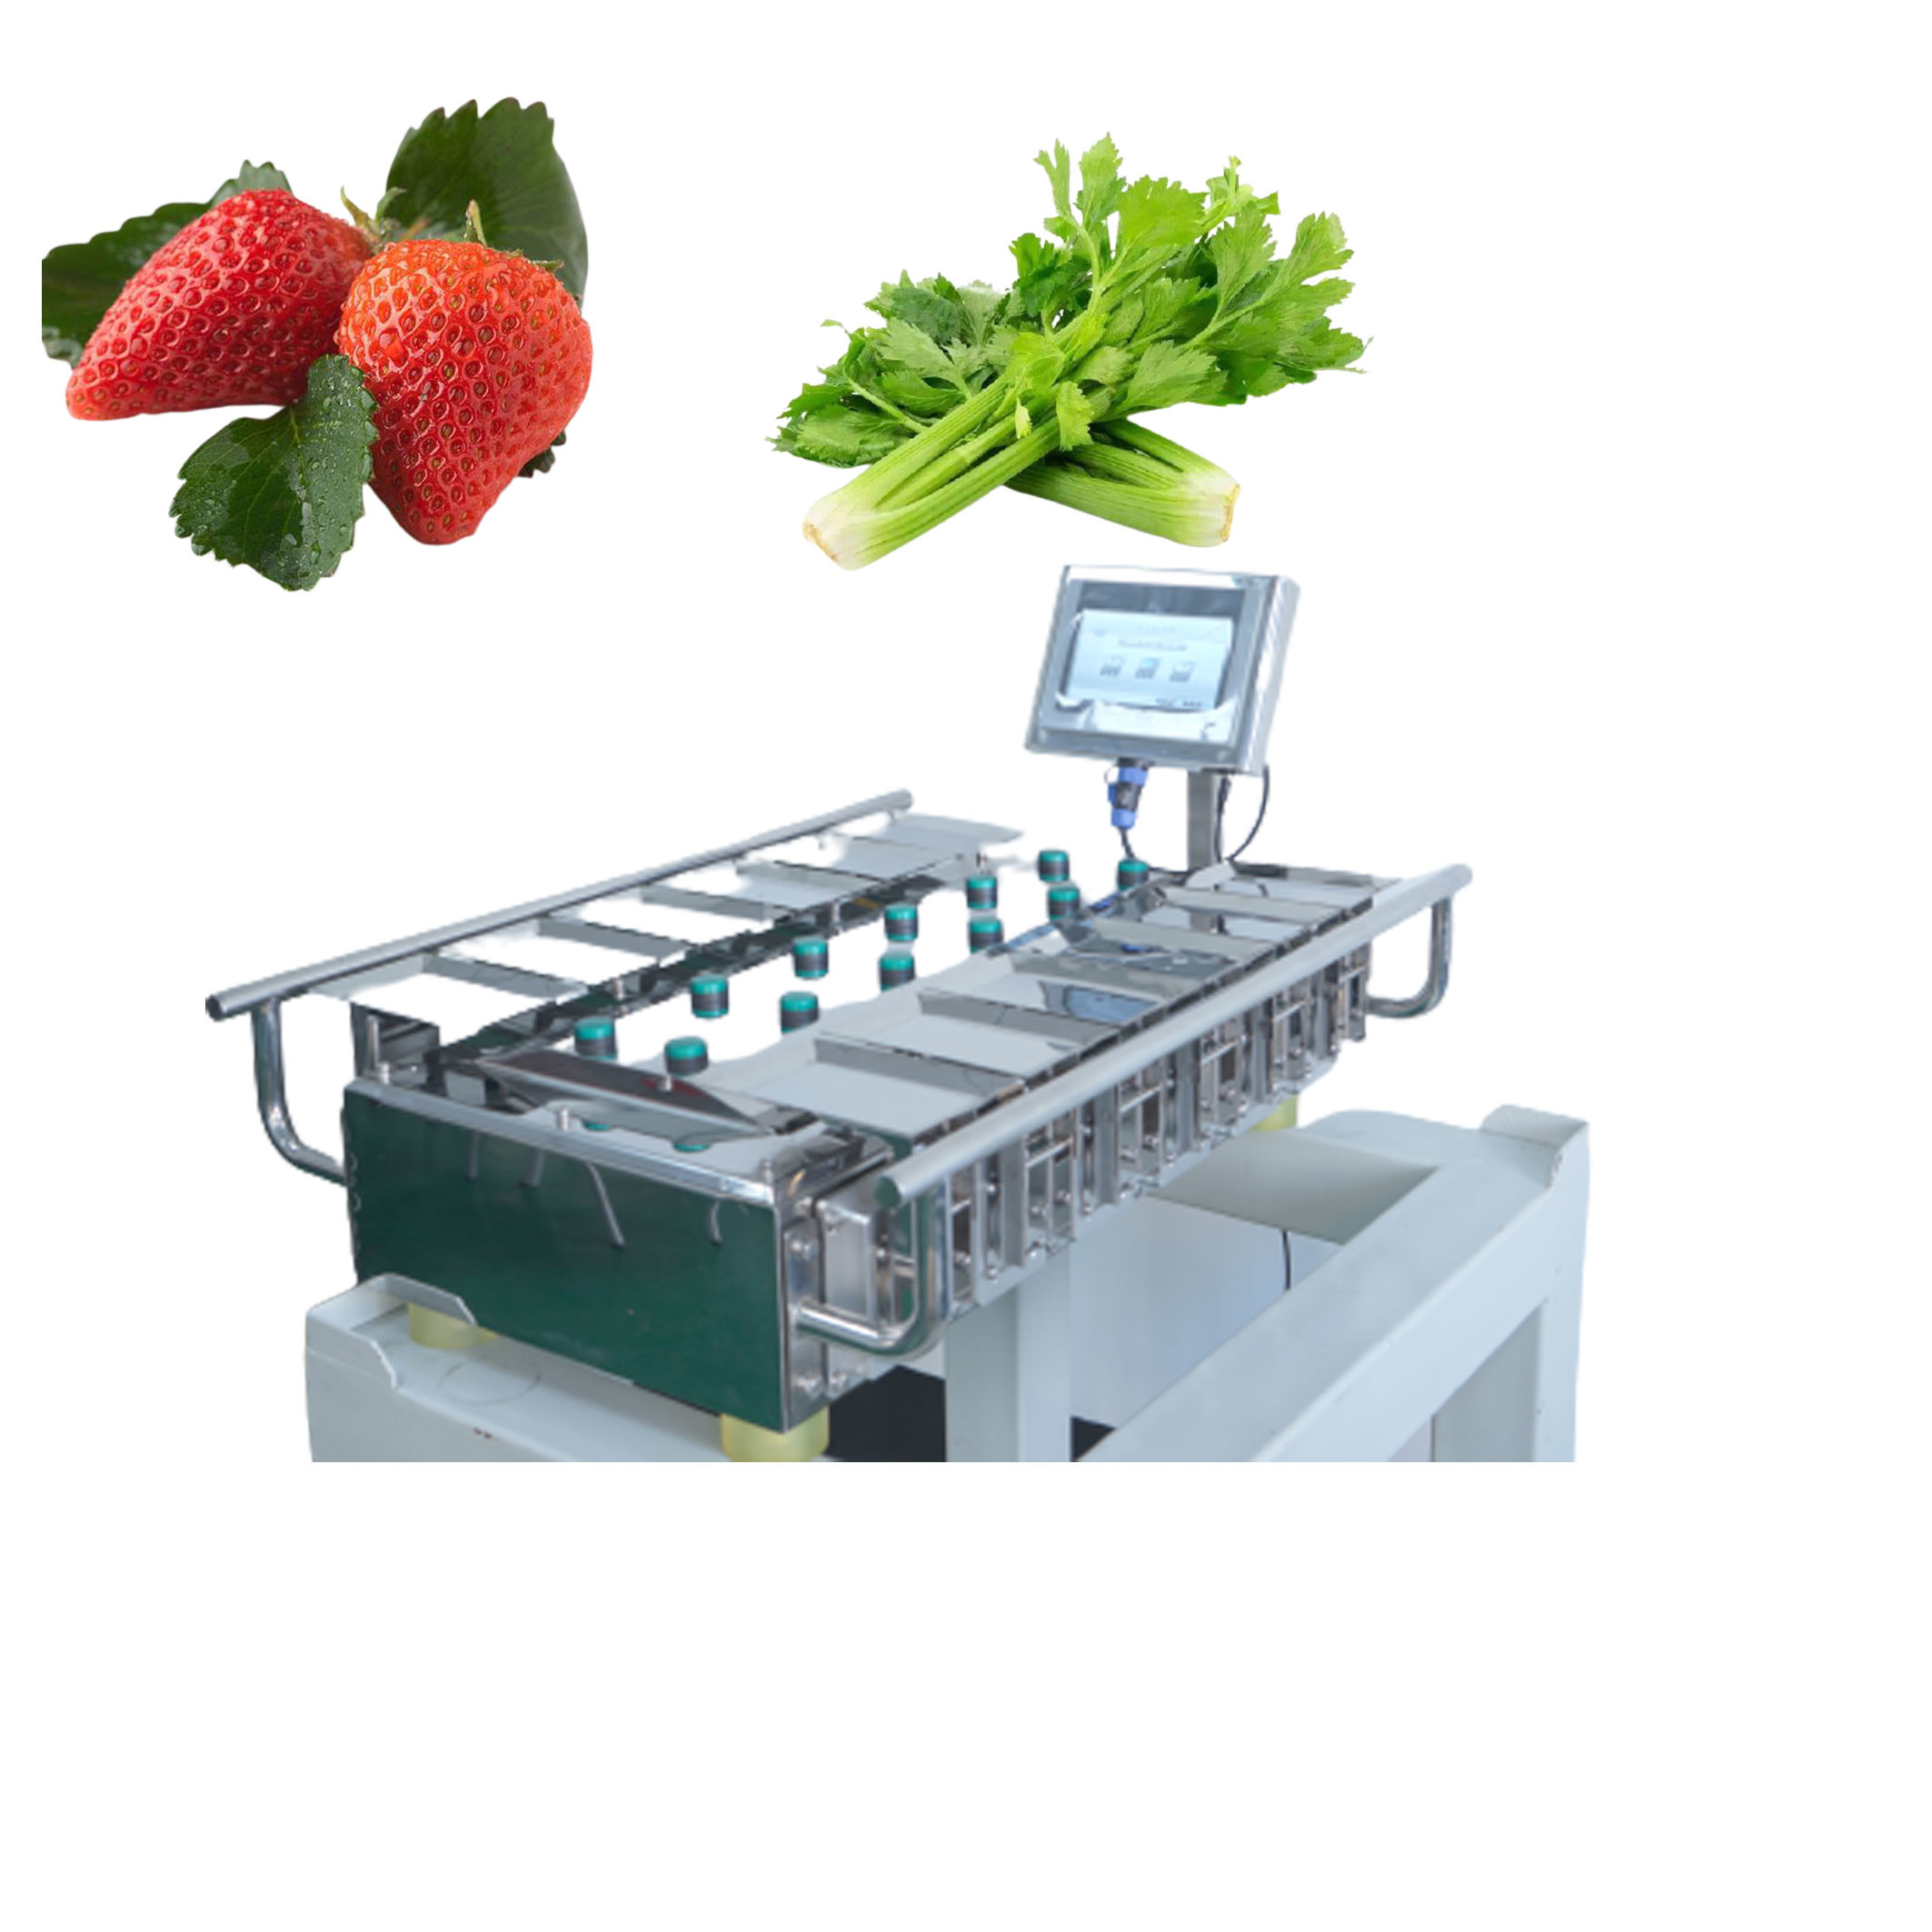 China 250g 500g 1000g Manual Packaging Machine Vegetables Fruits Weighing wholesale